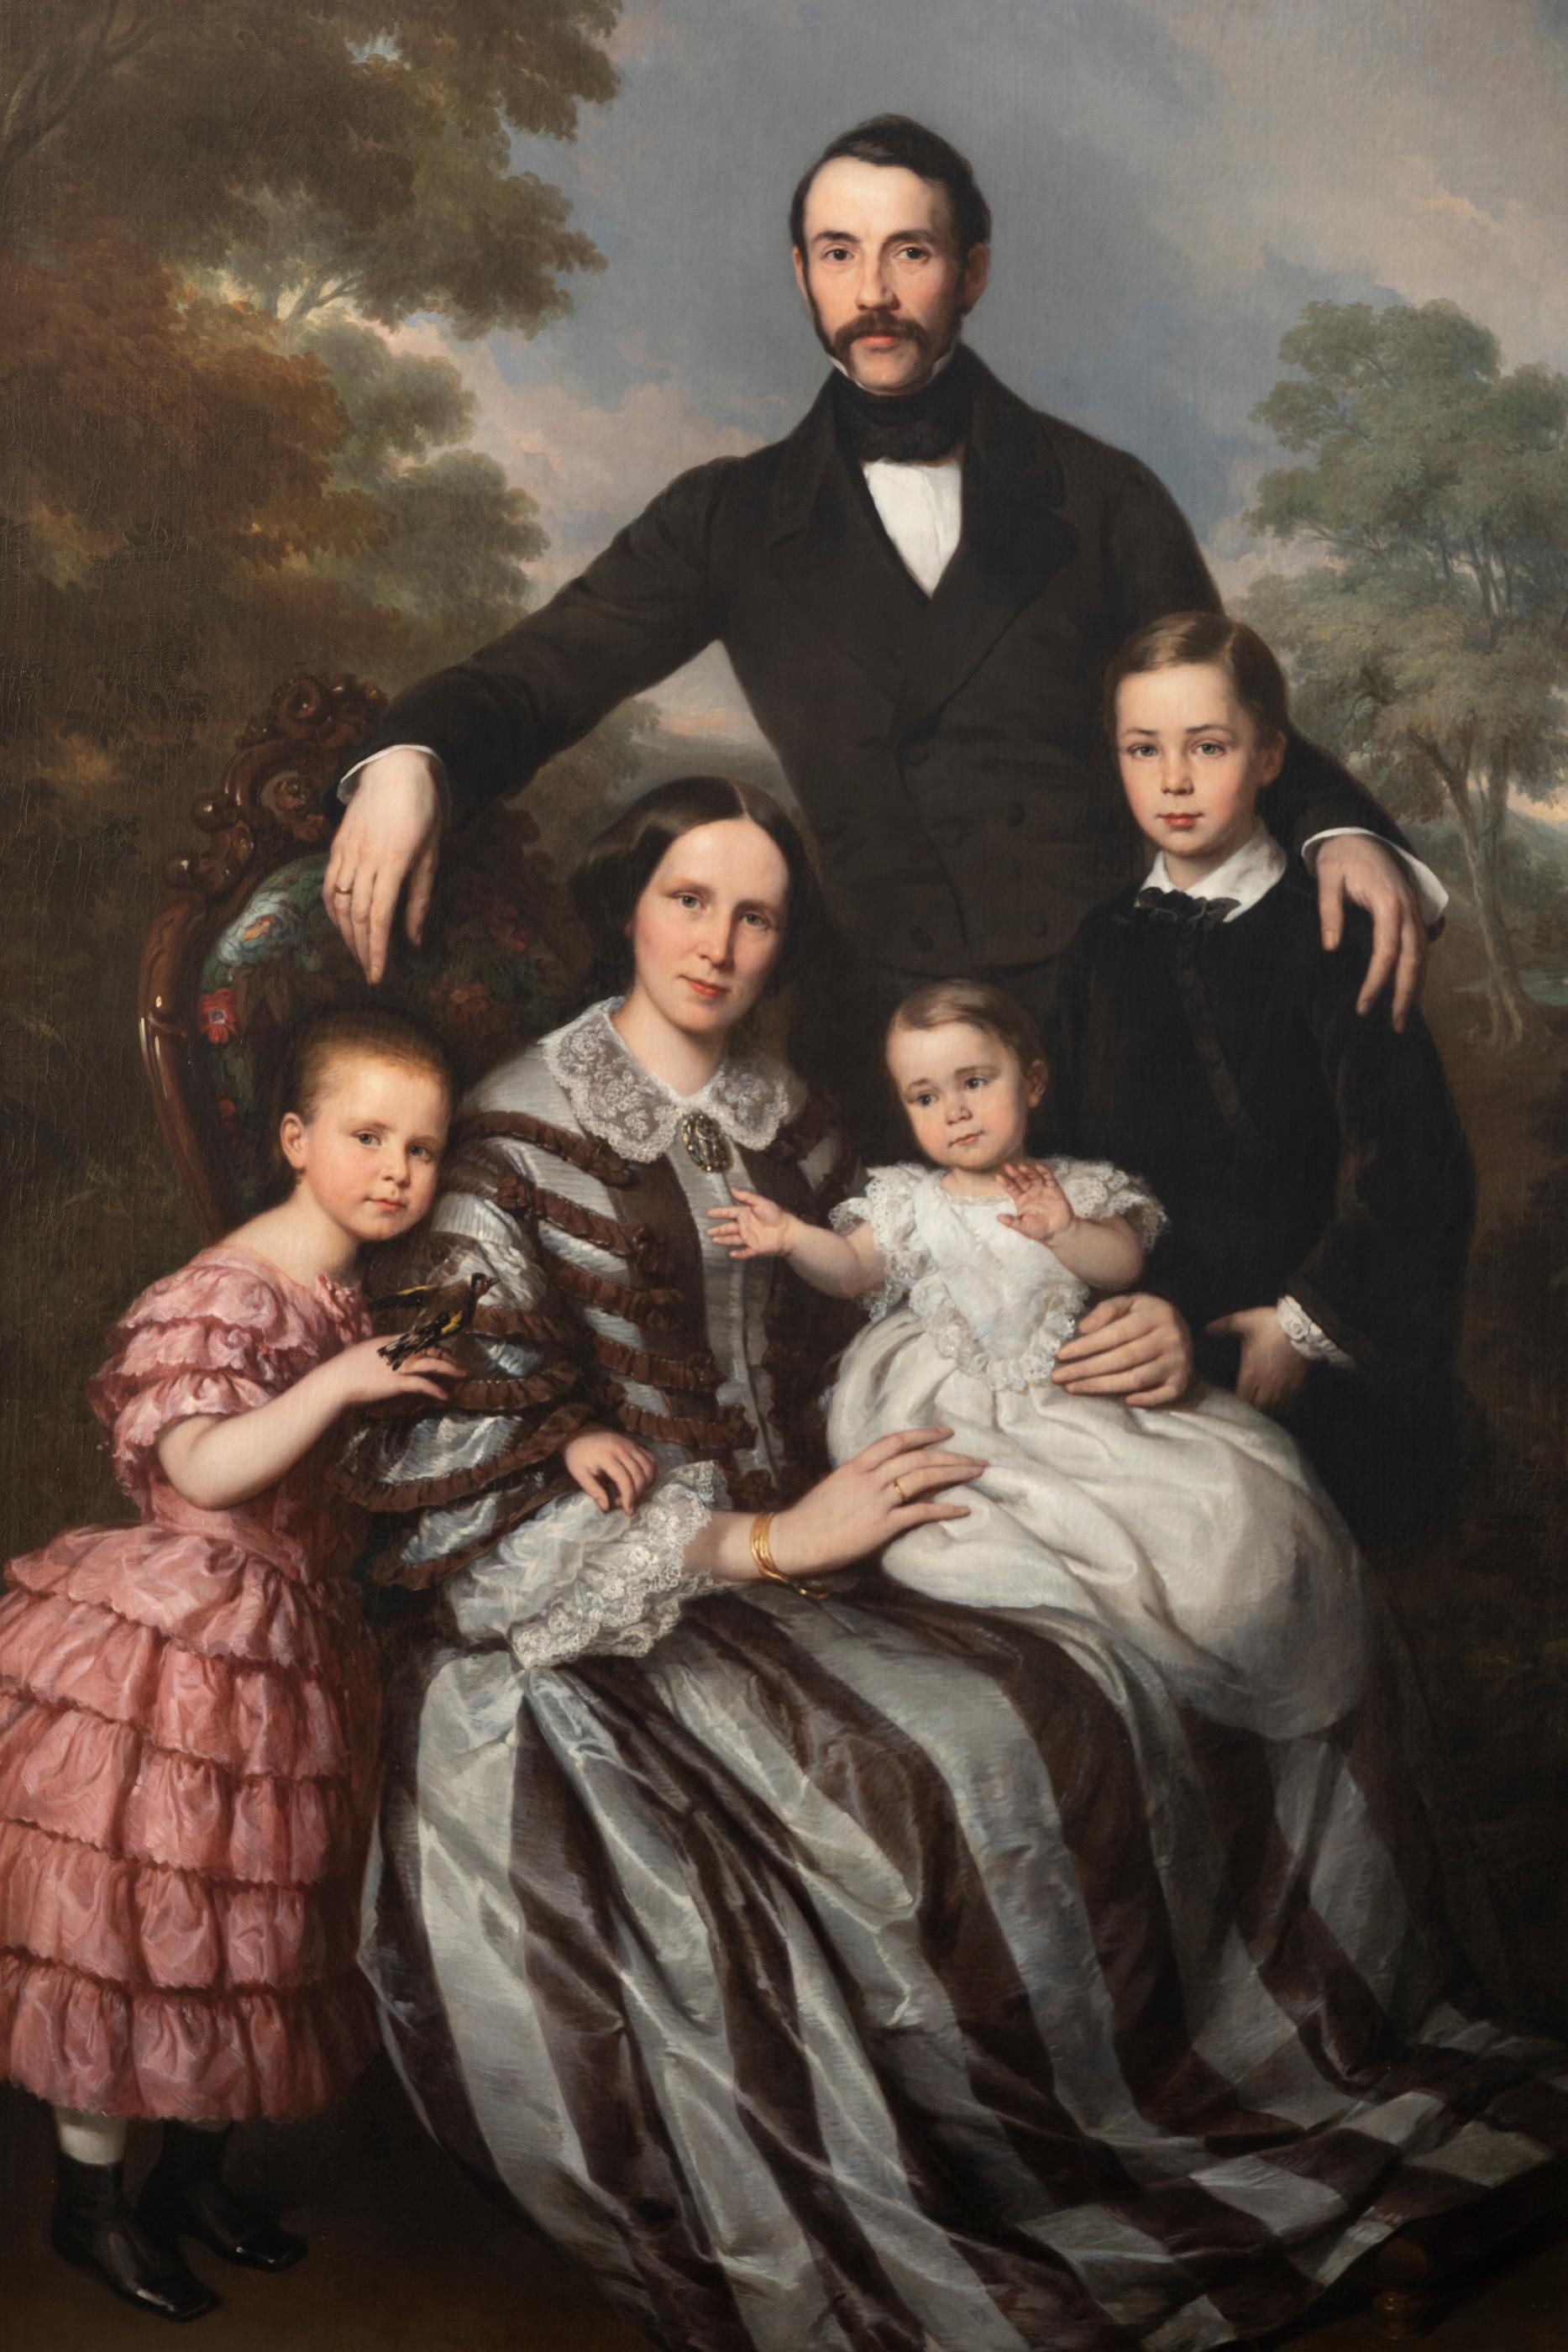 Ludwig Krevel, Family Portrait of Emil Albano Korte and his Family circa 1856, oil on canvas,

Sizes without frame: Length 205 cm, width 140 cm
Sizes with frame: Length 225 cm, width 160 cm

This portrait represents the industrialist Emil